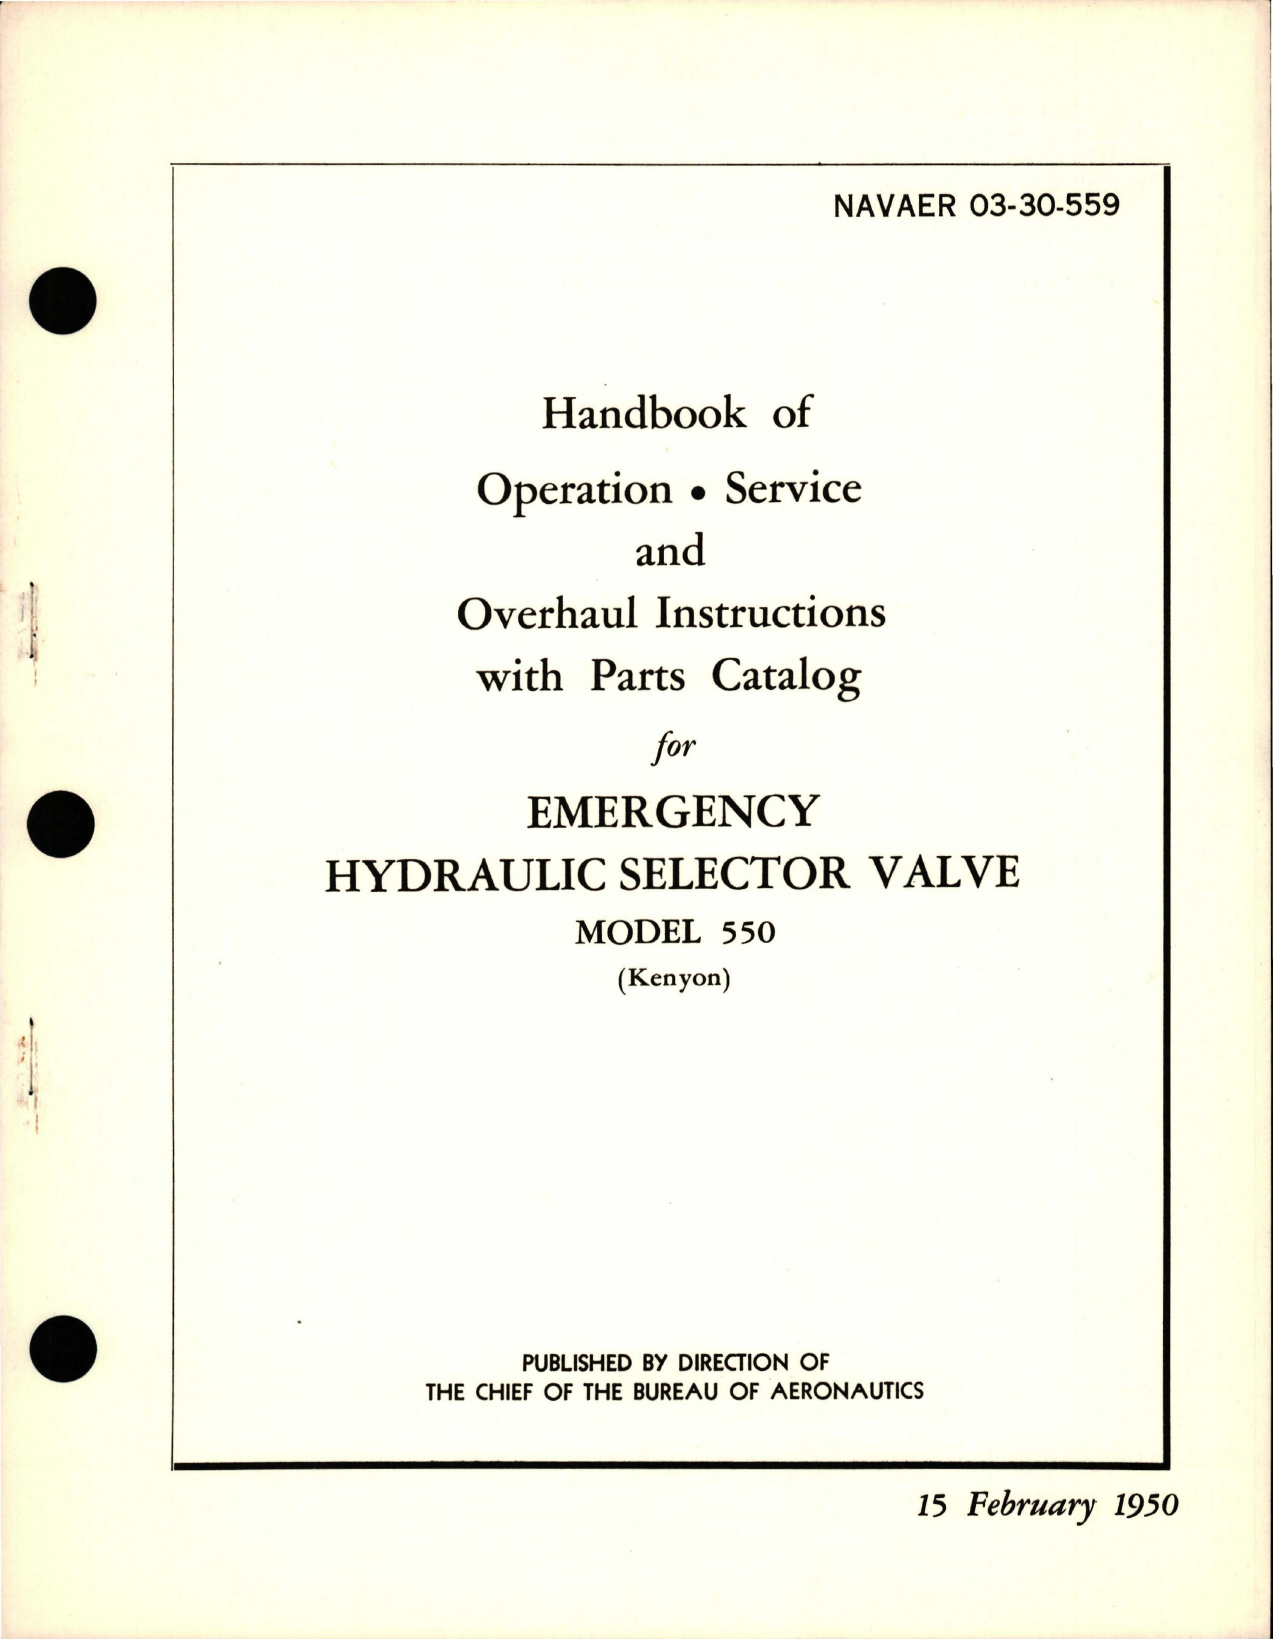 Sample page 1 from AirCorps Library document: Operation, Service and Overhaul Instructions with Parts Catalog for Emergency Hydraulic Selector Valve - Model 550